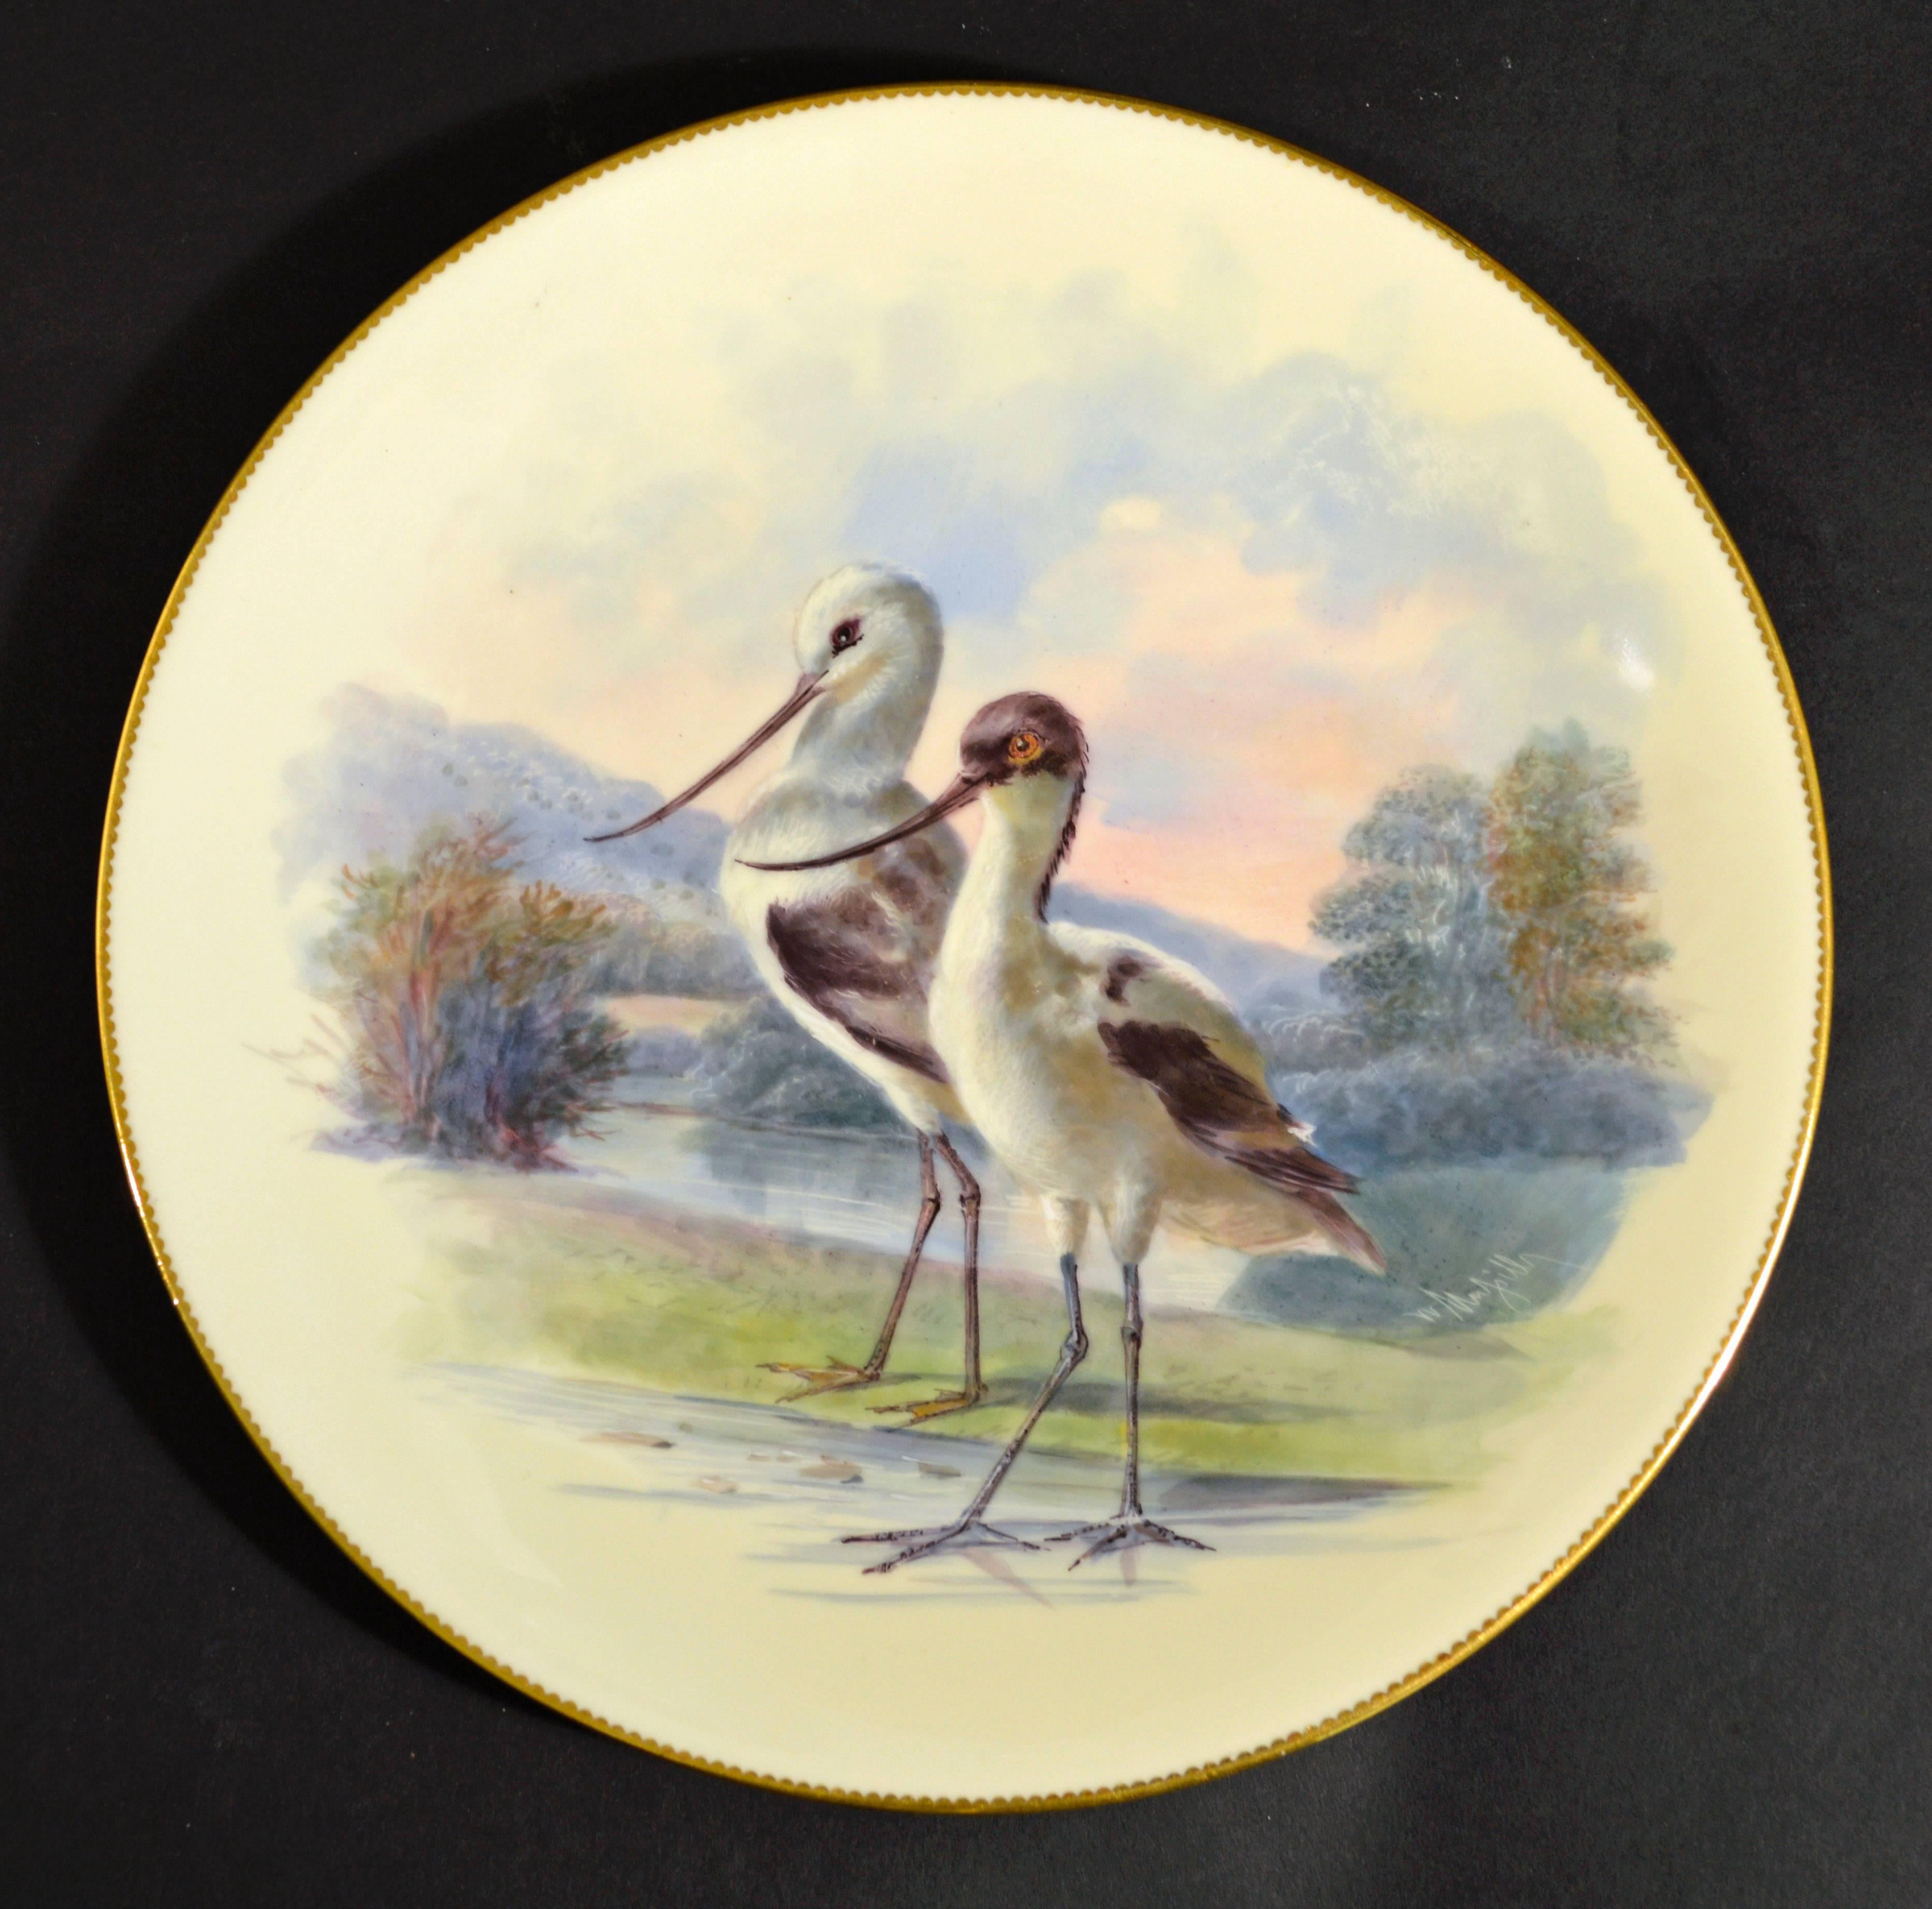 Thomas Minton Porcelain Bird Cabinet Plates, Signed by William Mussil. 1